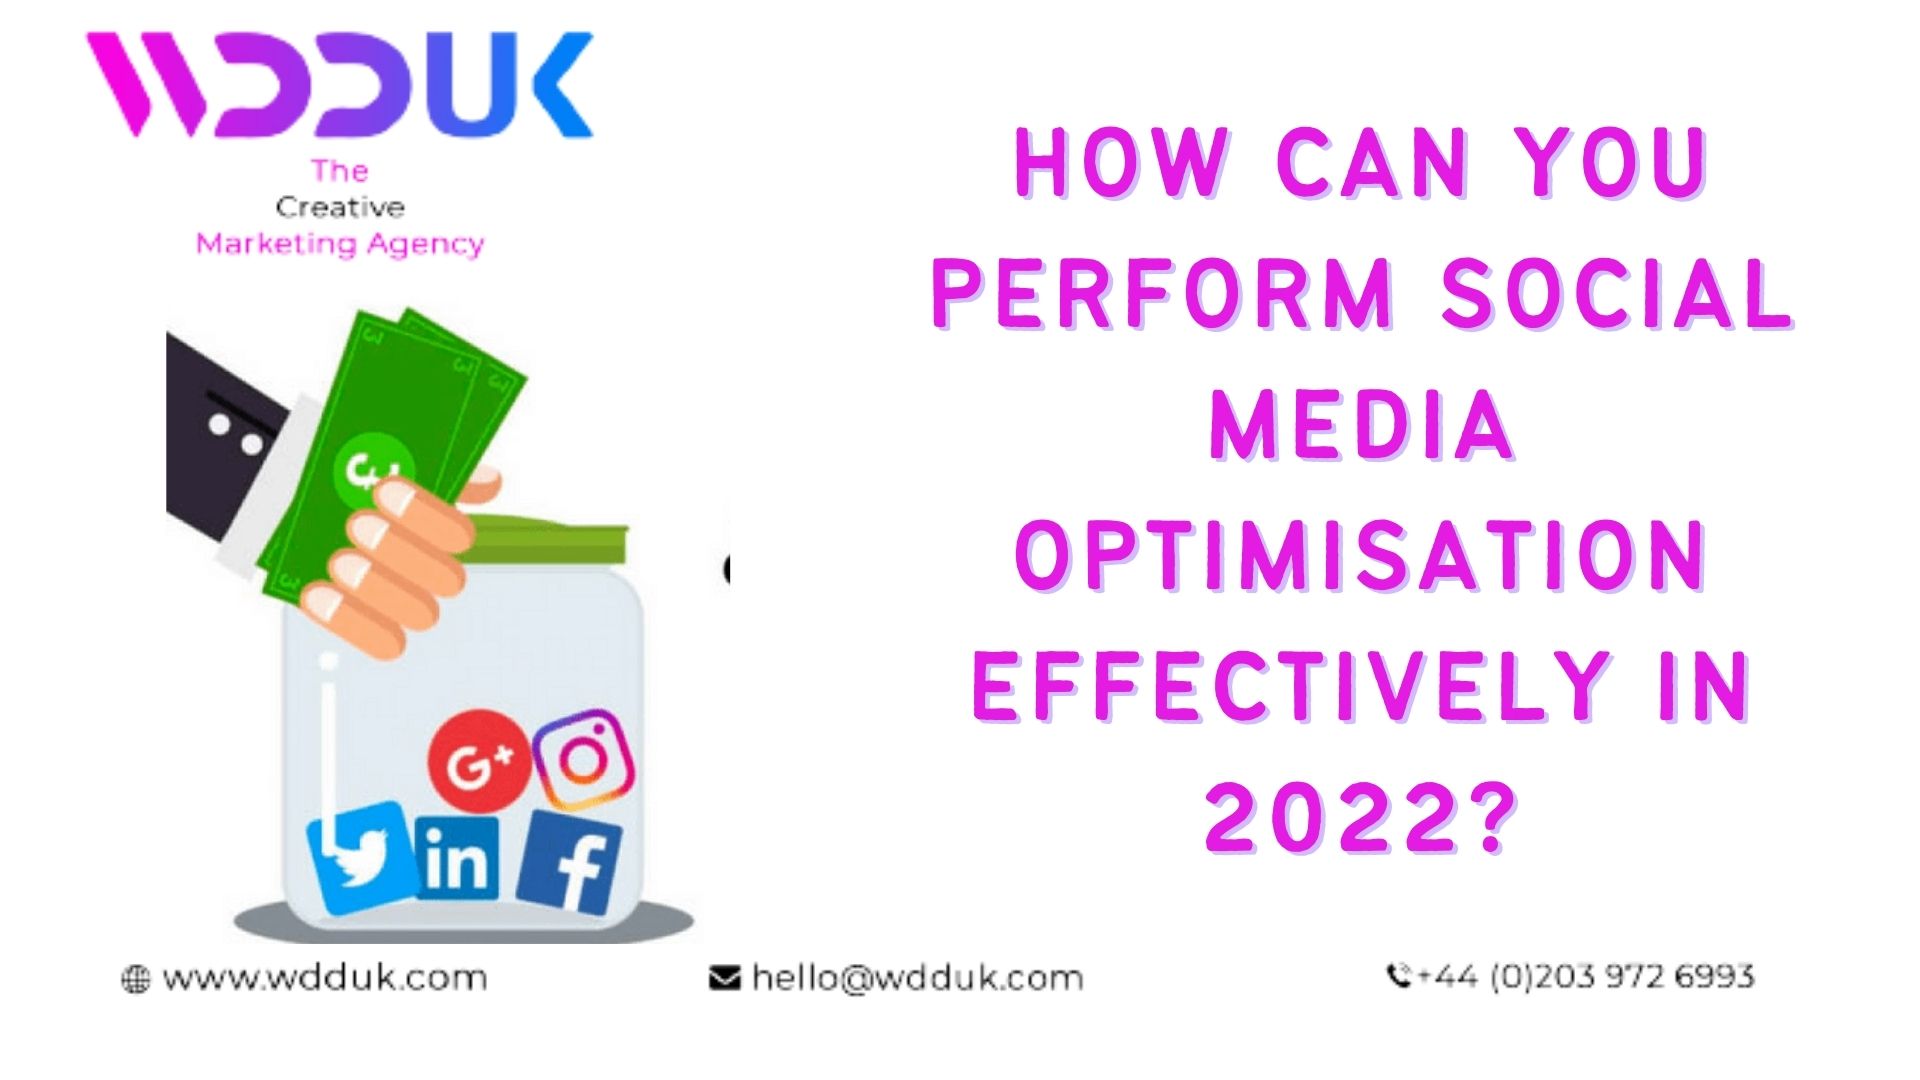 WOU HOW CAN YOU
So PERFORM SOCIAL

> MEDIA
OPTIMISATION

: EFFECTIVELY IN
5 20227?

& wwwwdduk.com hello@wdduk.com +44 (0)203 972 6993

3